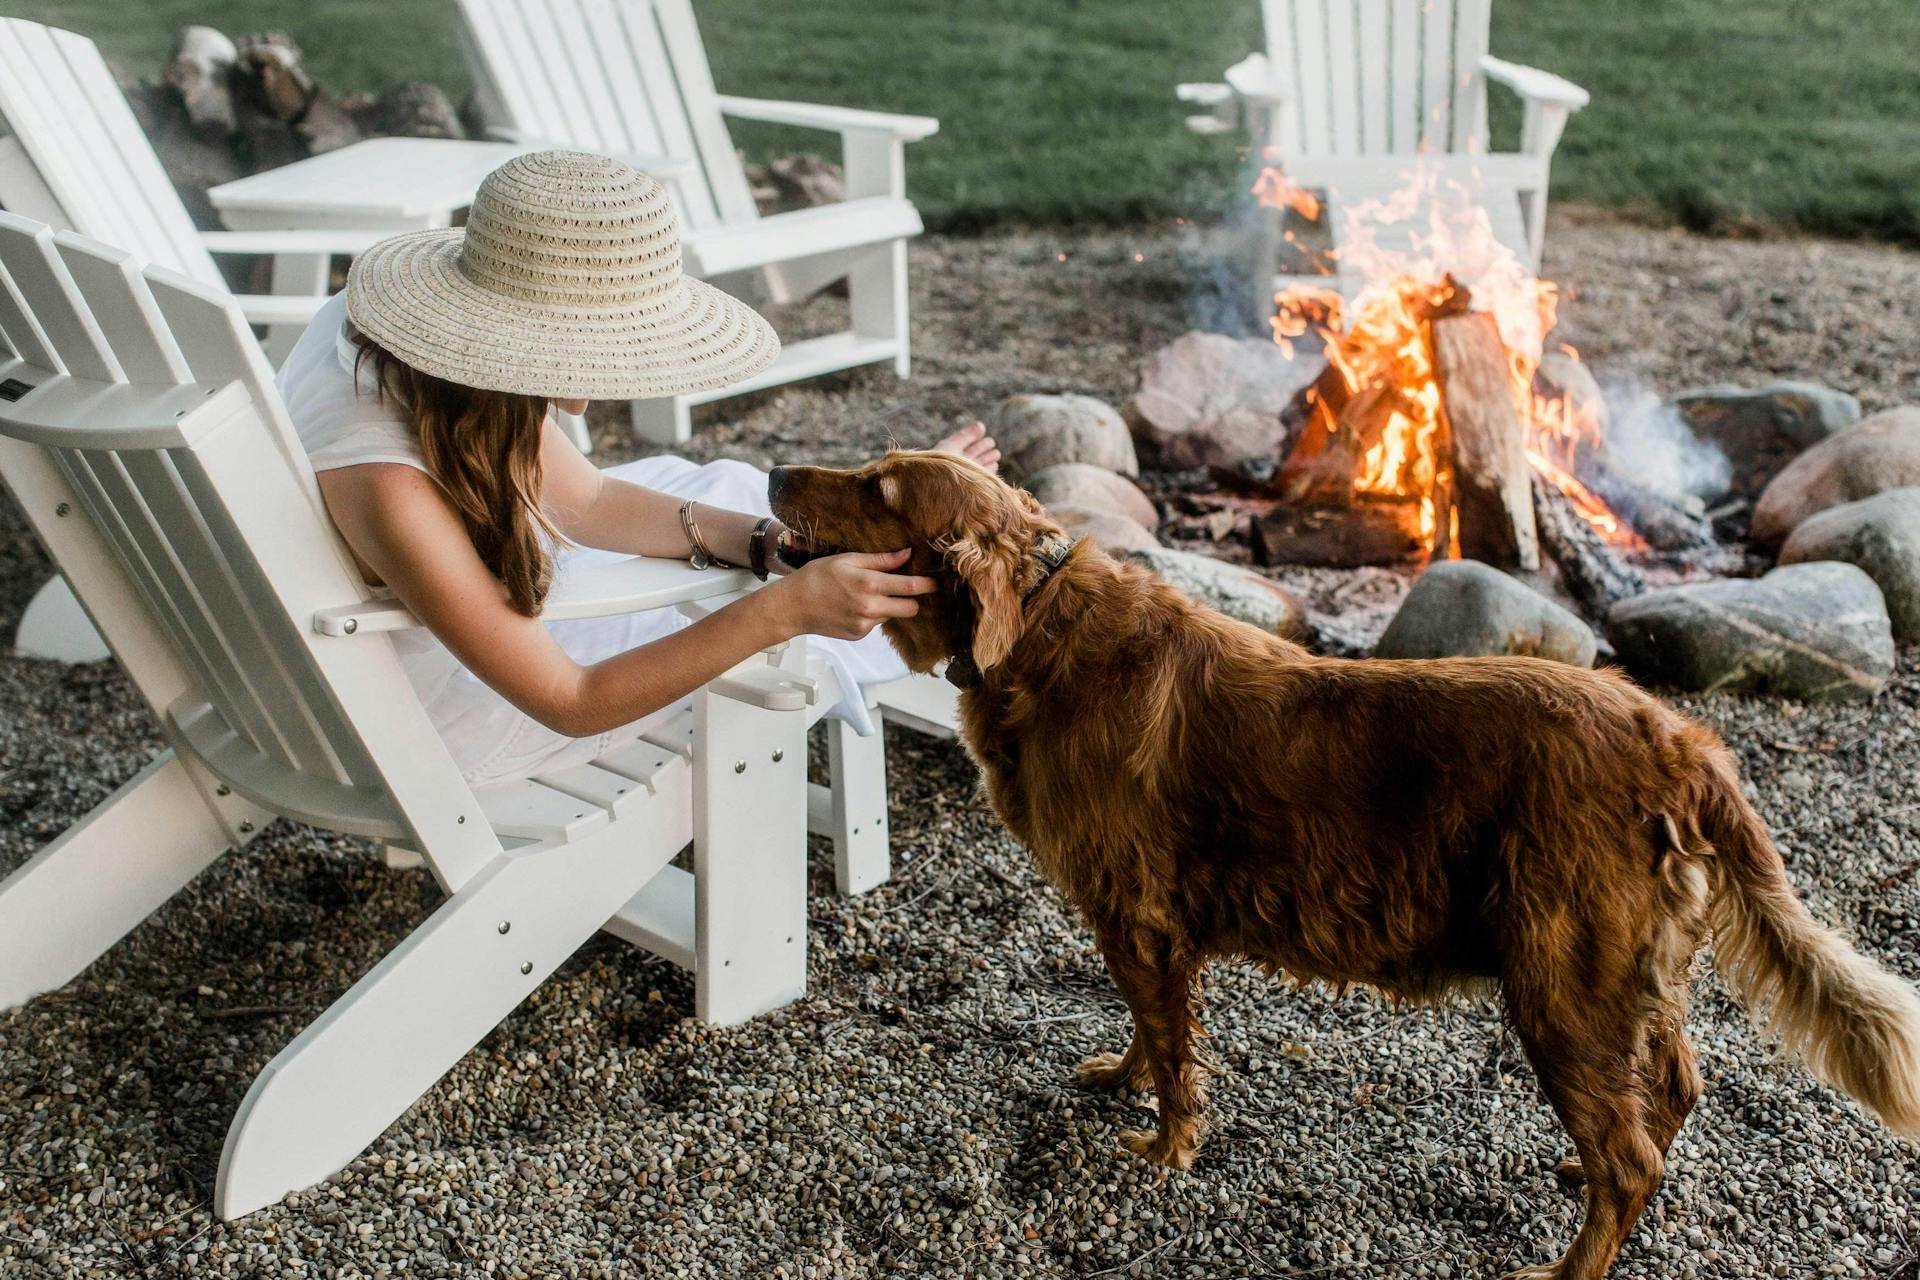 Heritage Adirondack Chairs in white around a campfire with a dog